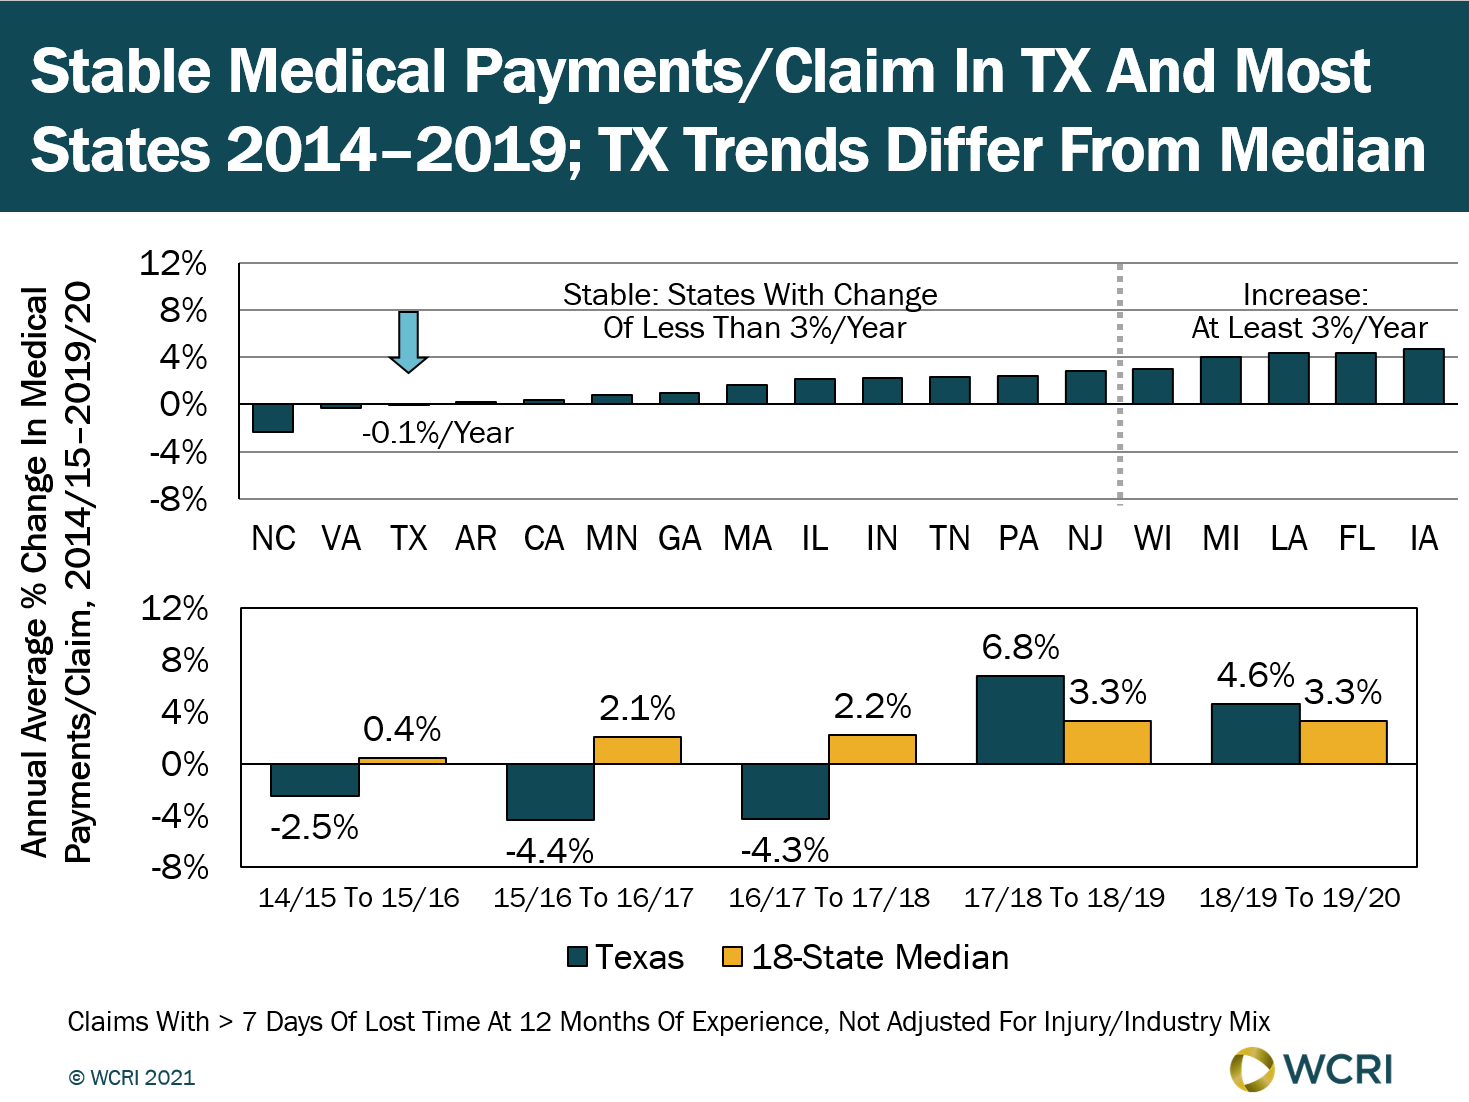 Medical Payments per Workers’ Compensation Claim Stable in Texas; Lower